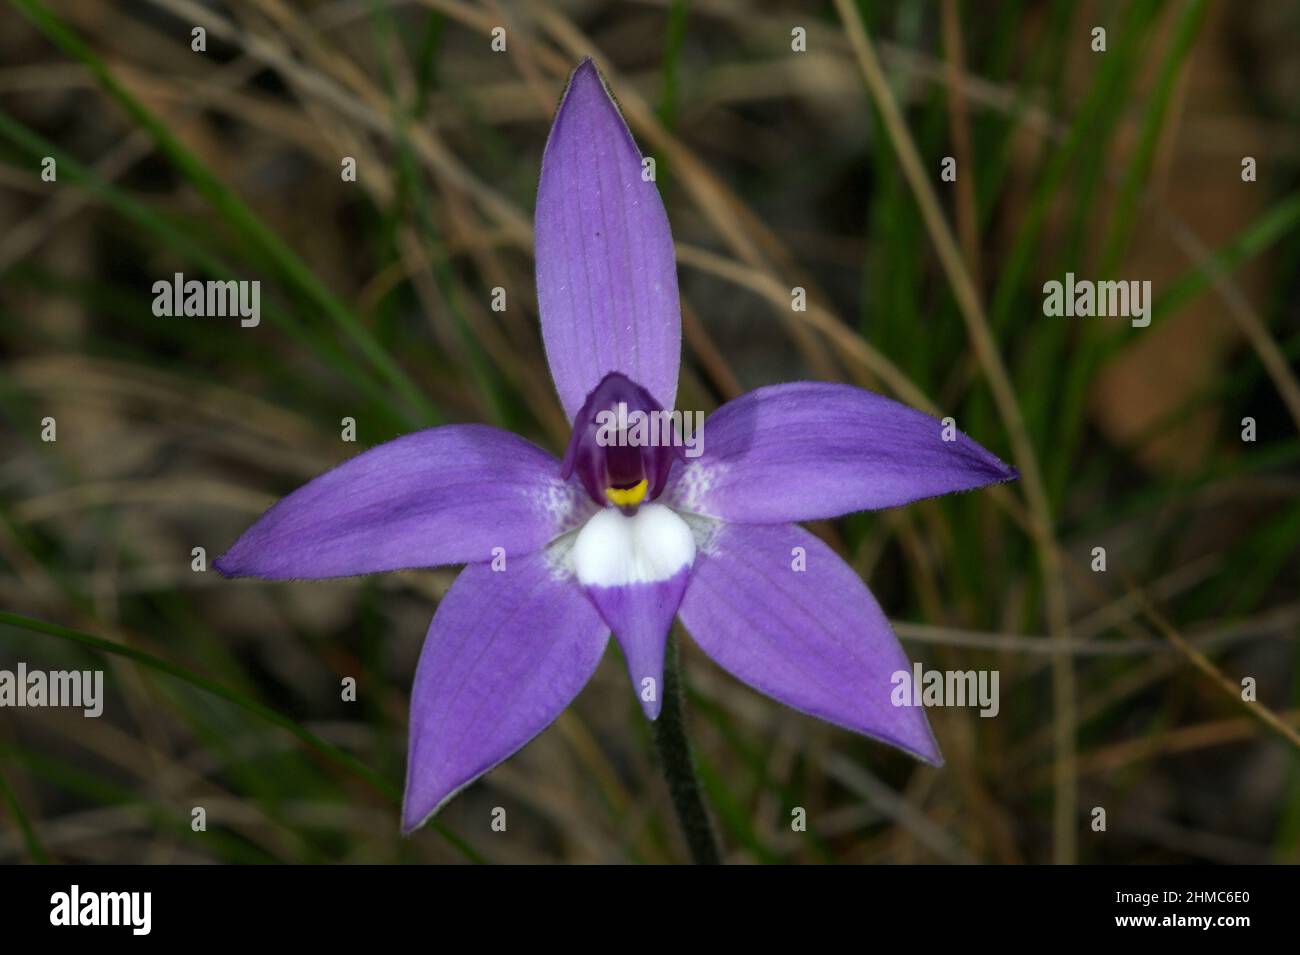 Wax Lips Orchids (Glossodia Major) are among my favourite flowers - their purple glory lights up the woodlands in which they grow. Hochkins Ridge. Stock Photo